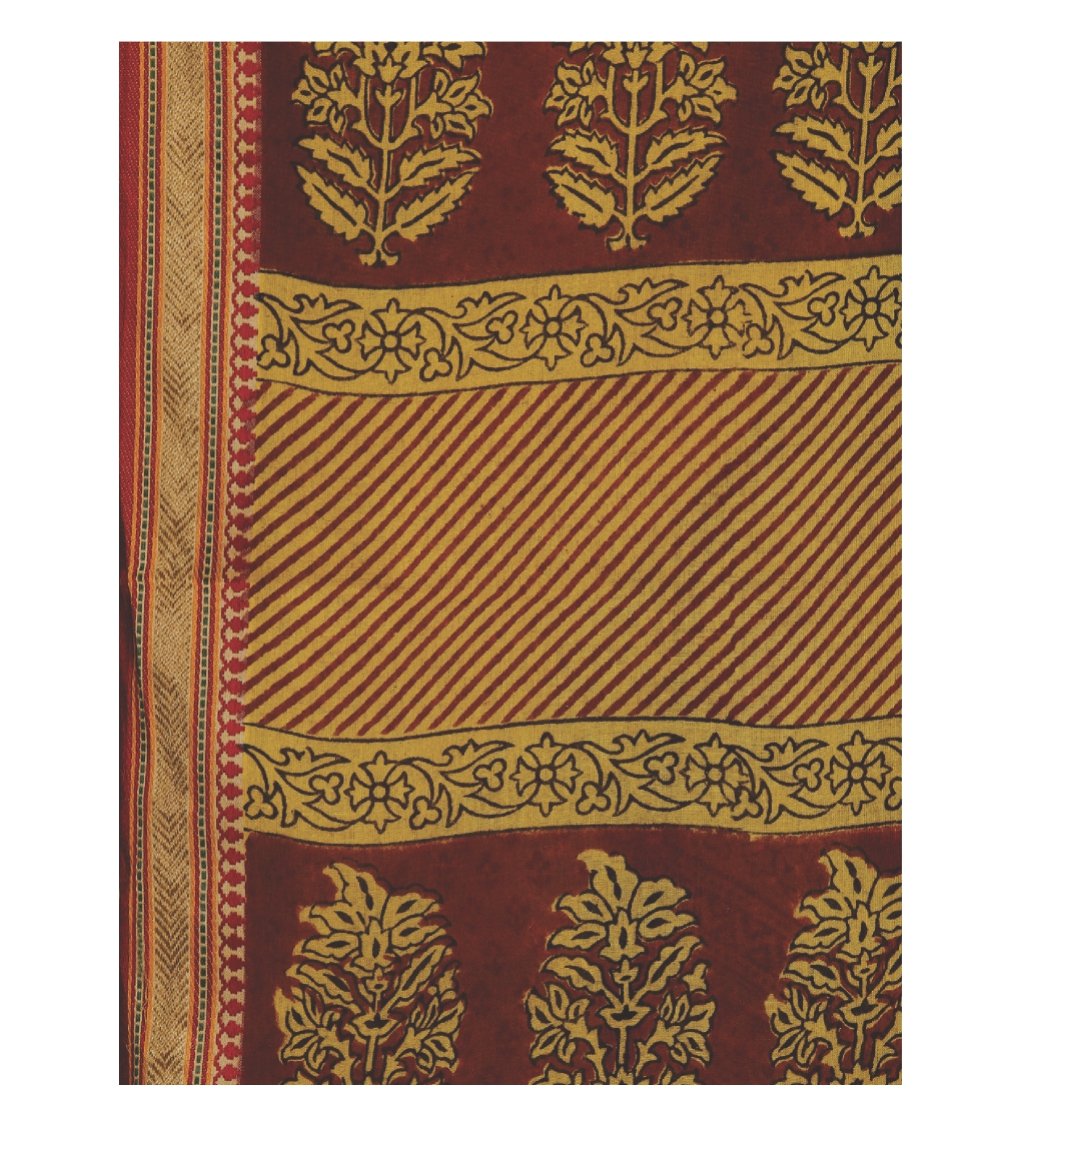 Mustard Yellow Cotton Hand Block Bagh Print Handcrafted Saree-Saree-Kalakari India-ZIBASA0075-Bagh, Cotton, Geographical Indication, Hand Blocks, Hand Crafted, Heritage Prints, Natural Dyes, Sarees, Sustainable Fabrics-[Linen,Ethnic,wear,Fashionista,Handloom,Handicraft,Indigo,blockprint,block,print,Cotton,Chanderi,Blue, latest,classy,party,bollywood,trendy,summer,style,traditional,formal,elegant,unique,style,hand,block,print, dabu,booti,gift,present,glamorous,affordable,collectible,Sari,Saree,pr